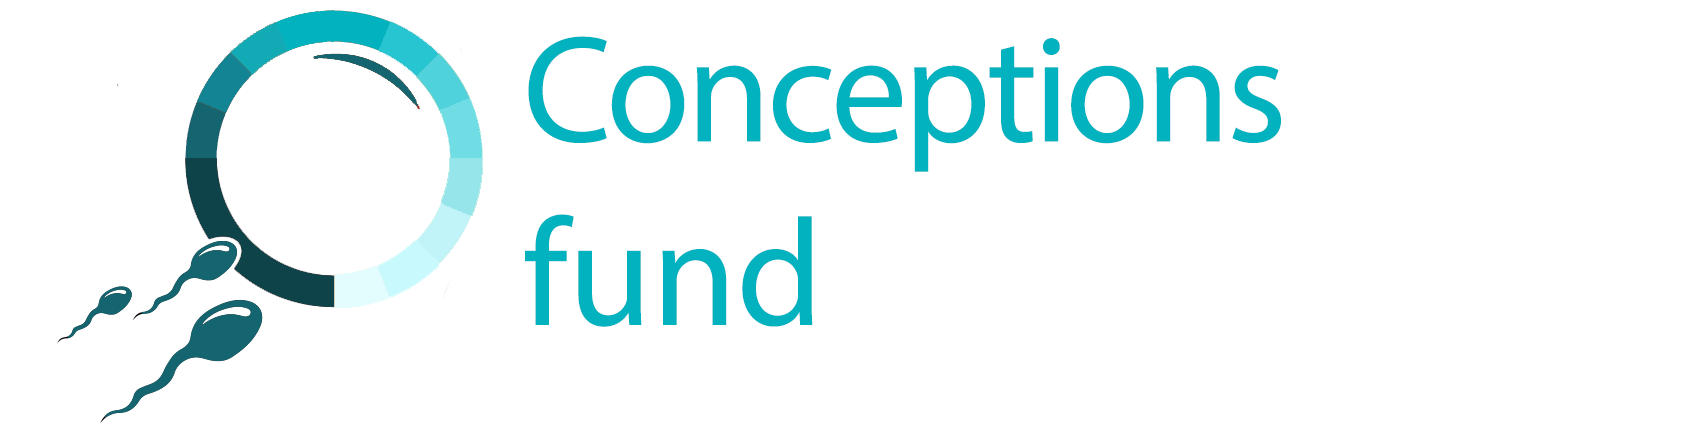 Conceptions fund logo